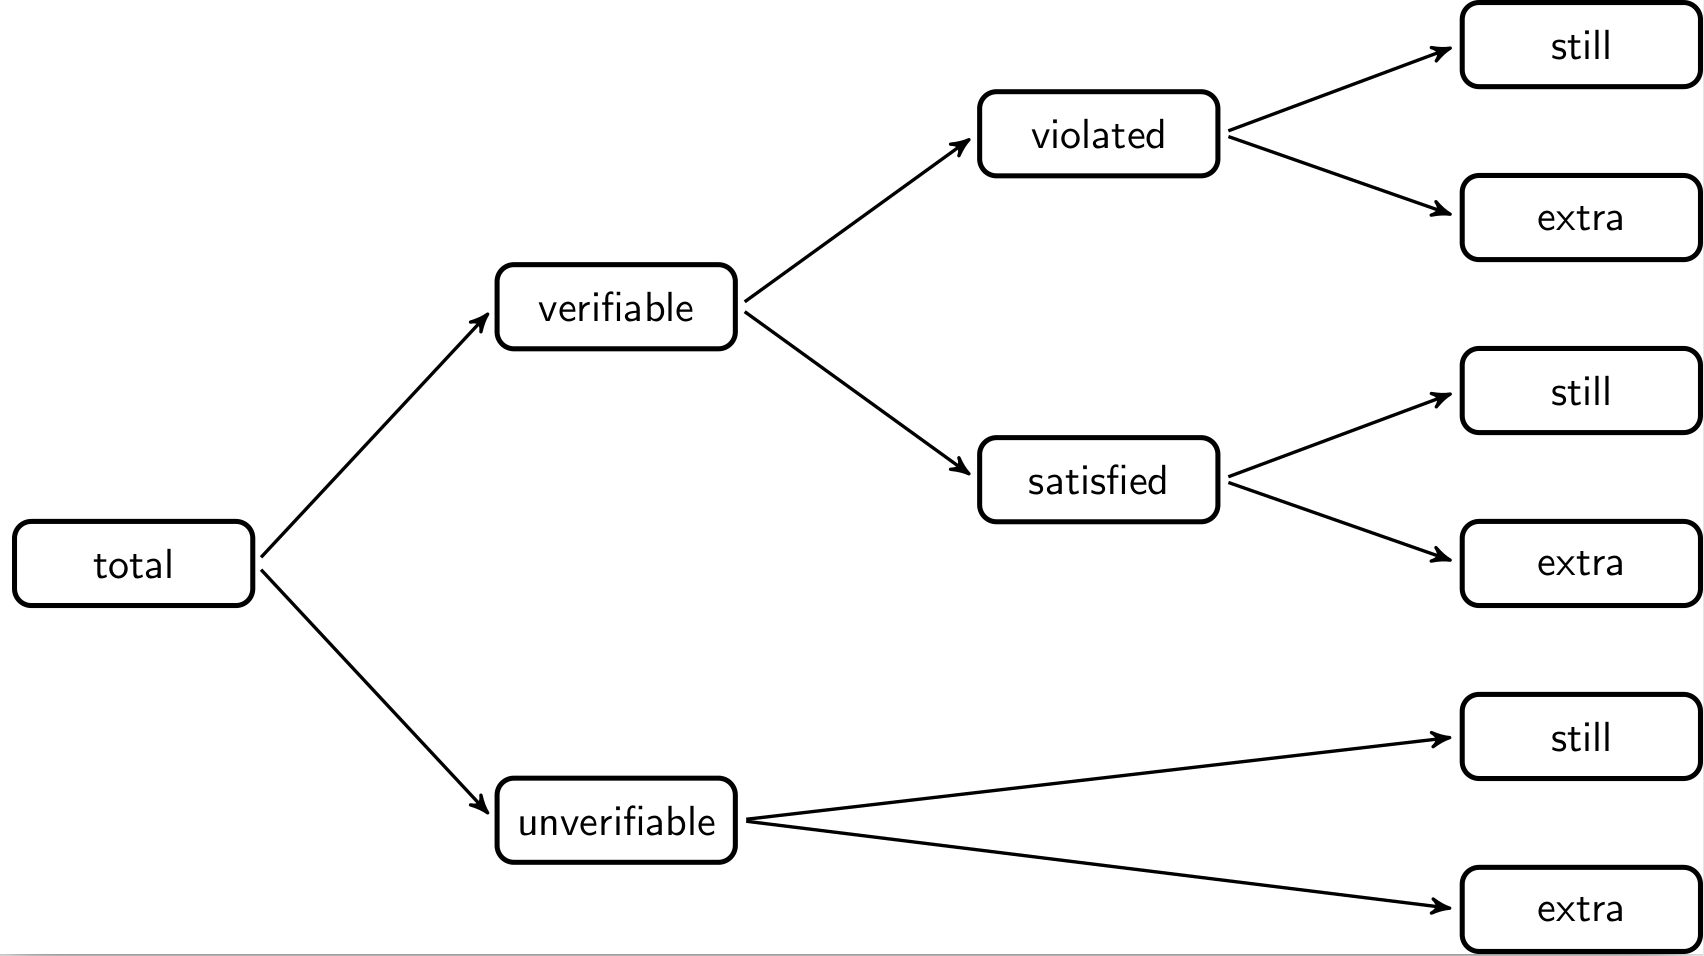 decomposition of validation output